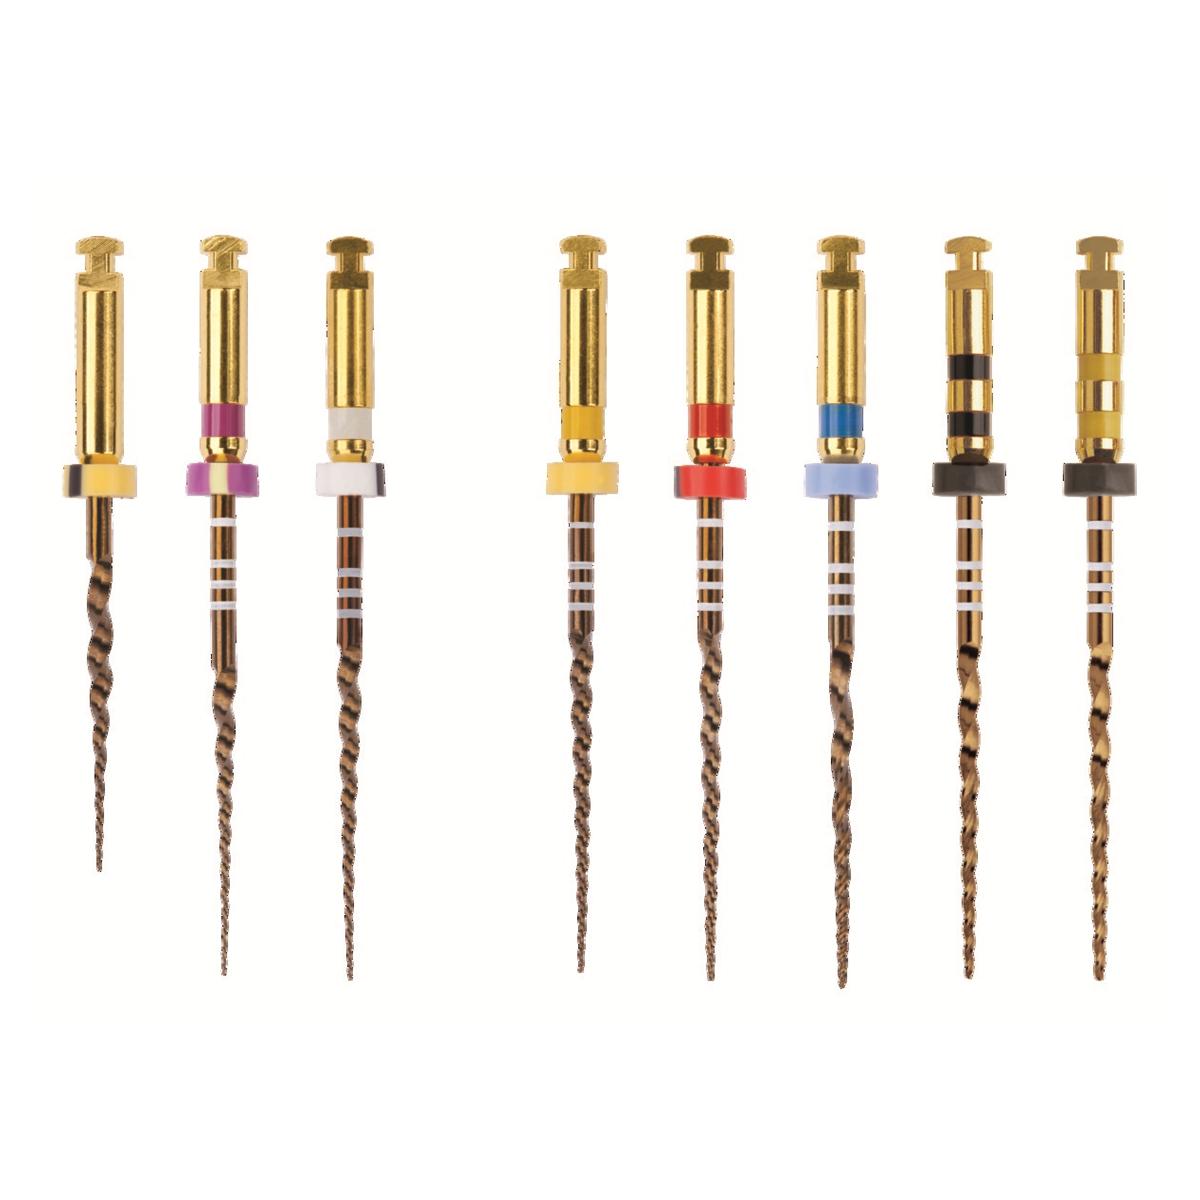 PRO-TAPER GOLD STERILES 21MM S1 (6) MAILLEFER